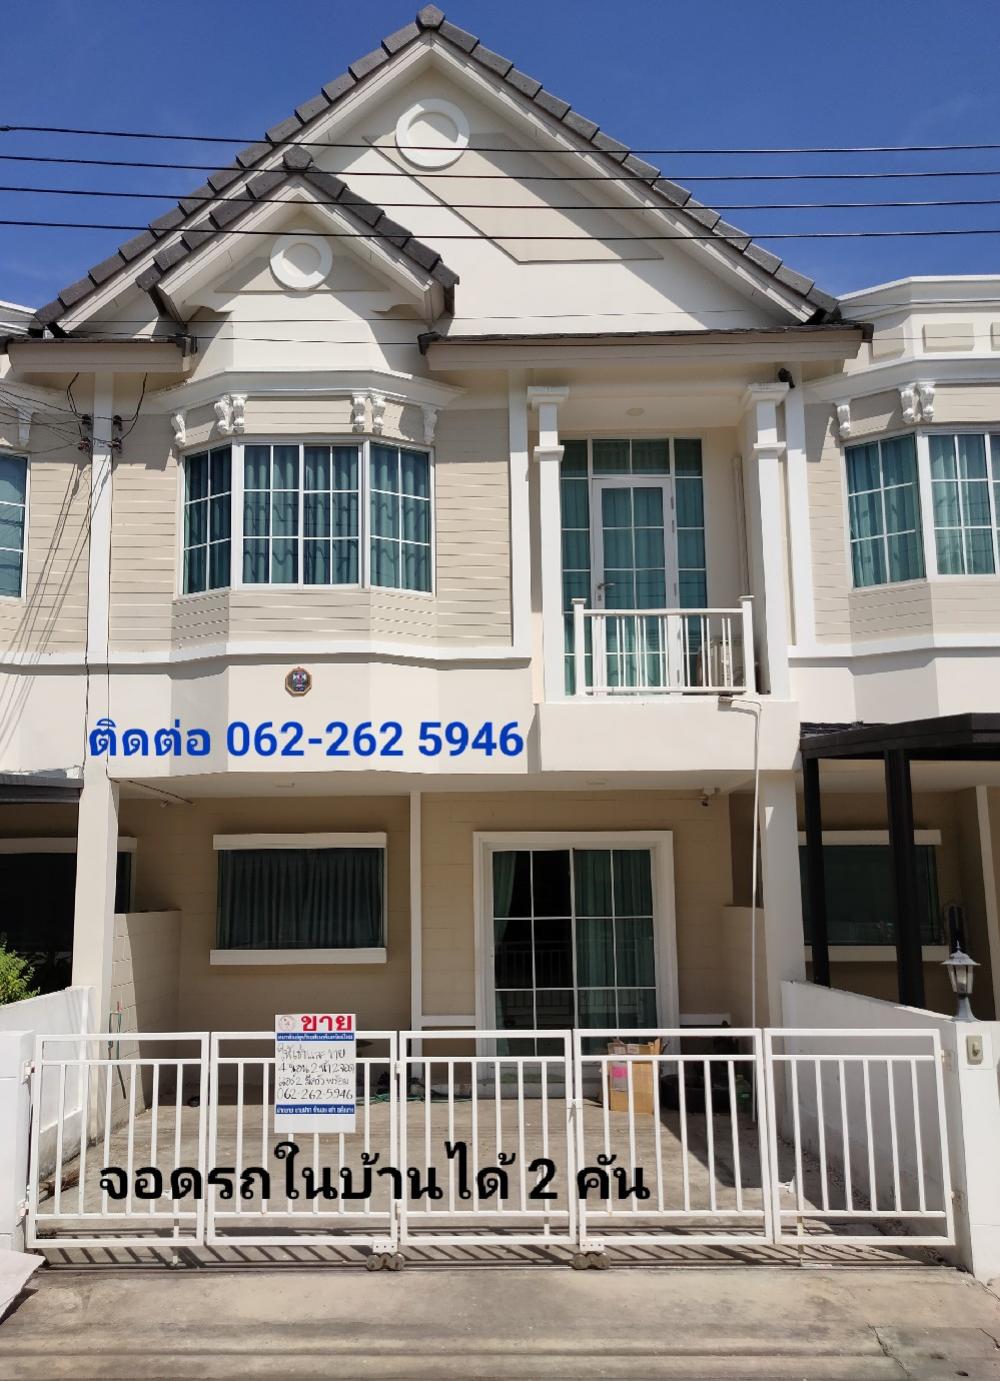 For RentTownhouseNonthaburi, Bang Yai, Bangbuathong : English style house for rent, 4 bedrooms, 2 bathrooms, 2 parking spaces, kitchen extension with counter and hood can raise small animals